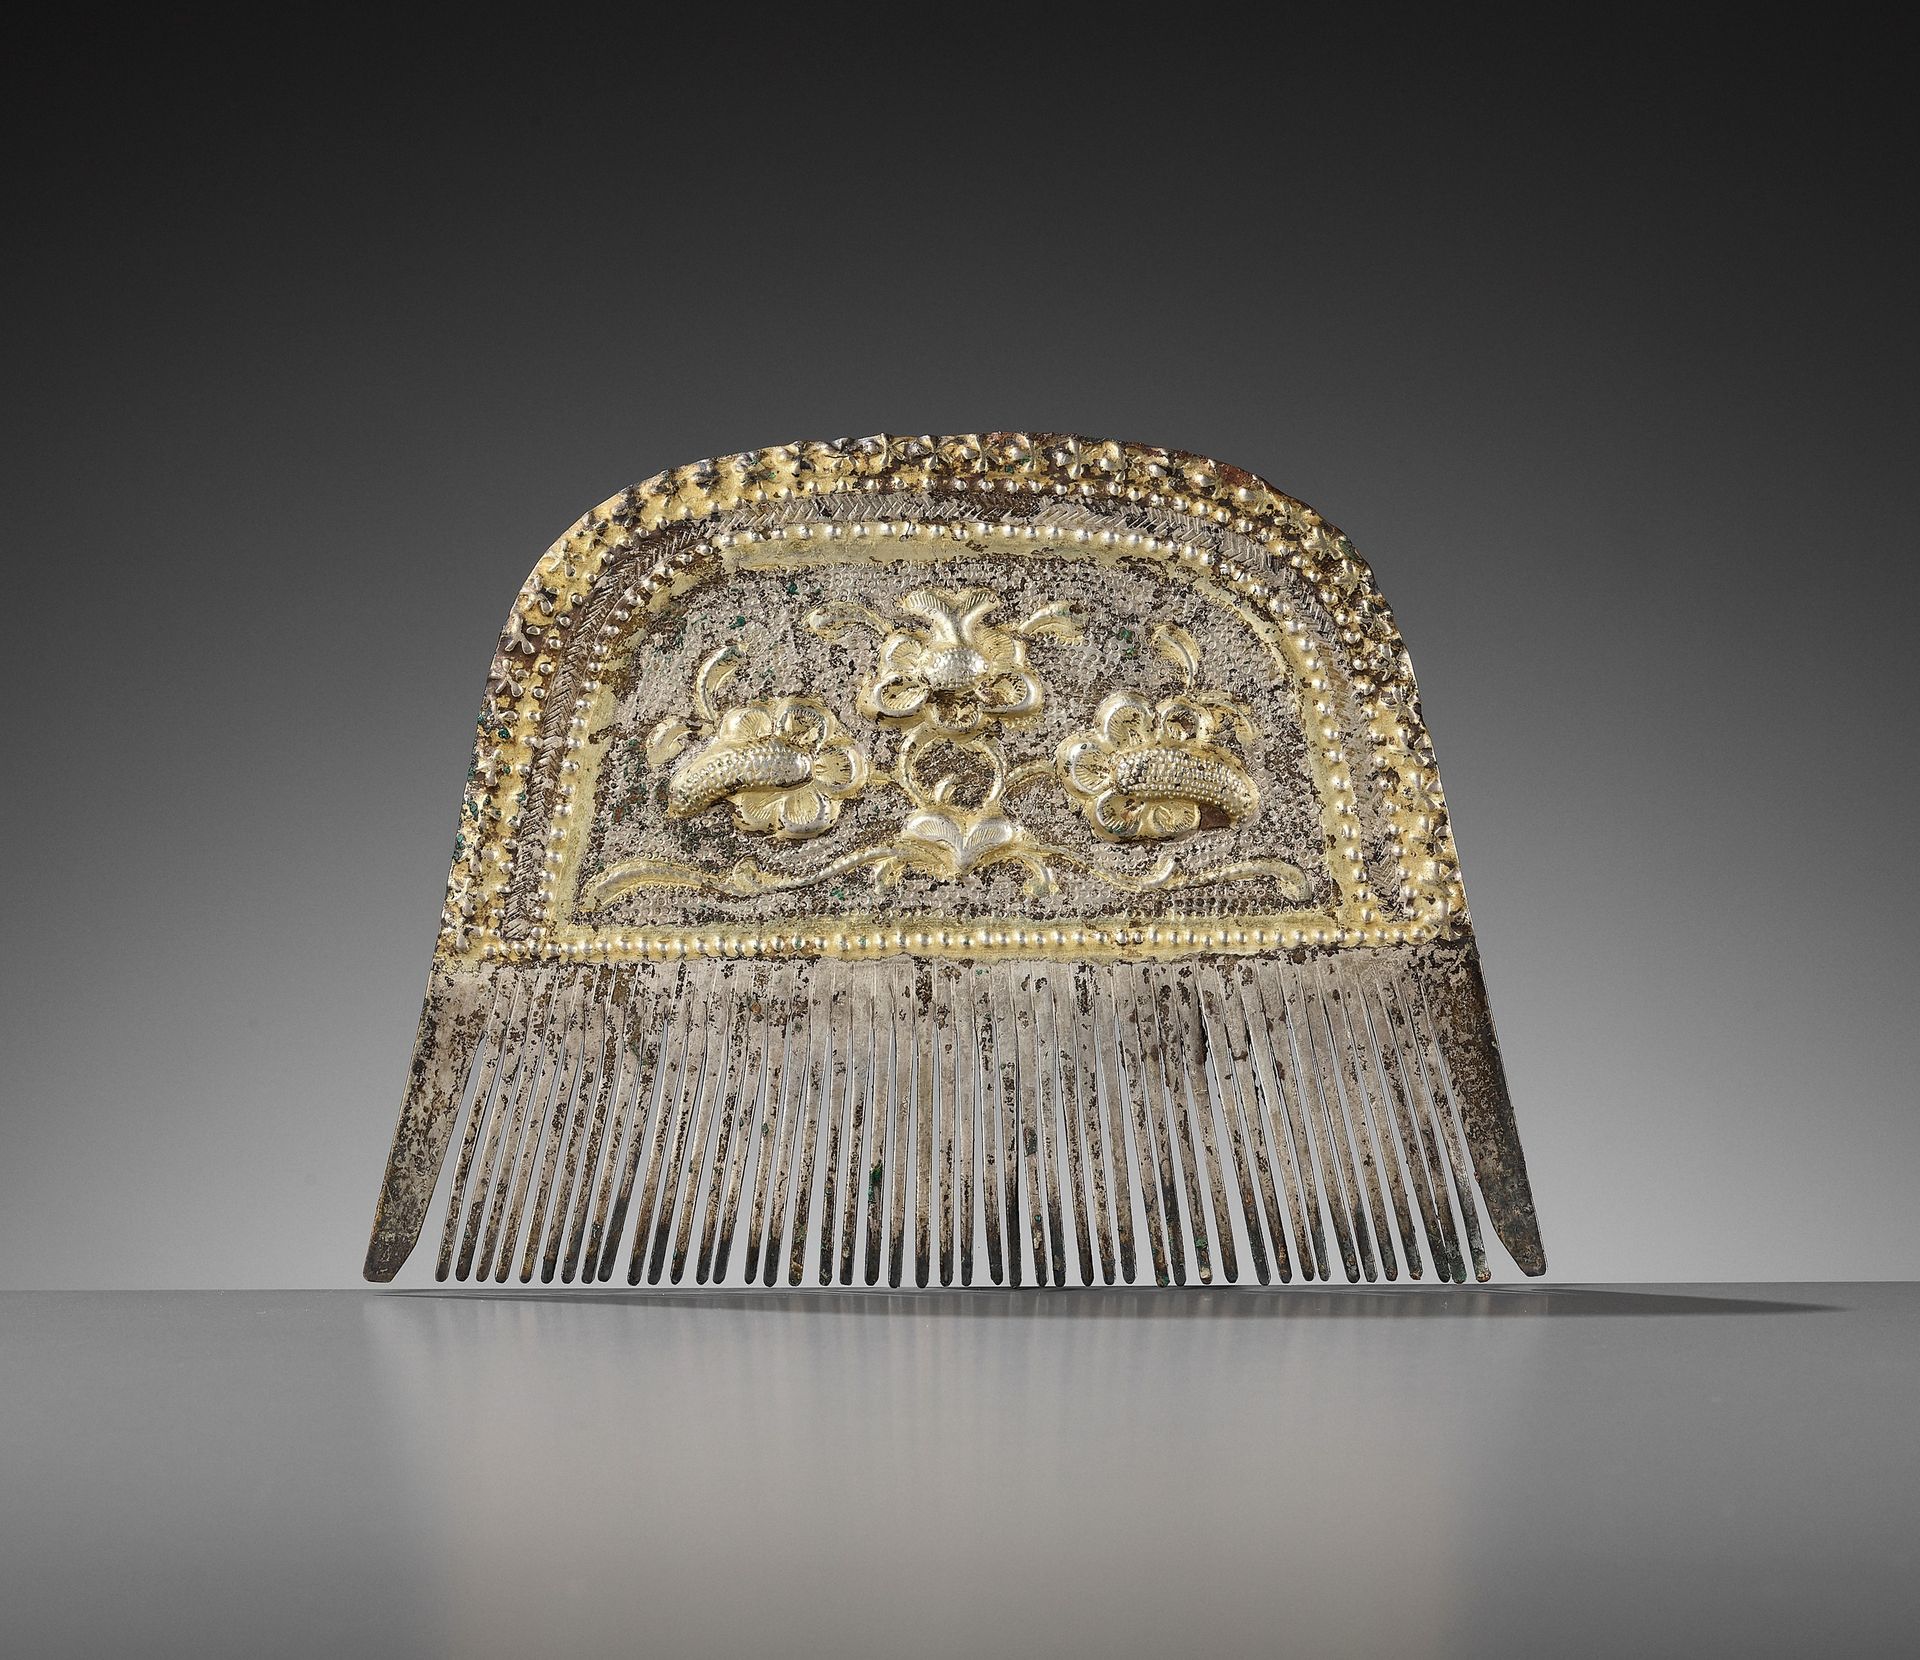 A PARCEL-GILT SILVER COMB, TANG DYNASTY A PARCEL-GILT SILVER COMB, TANG DYNASTY
&hellip;